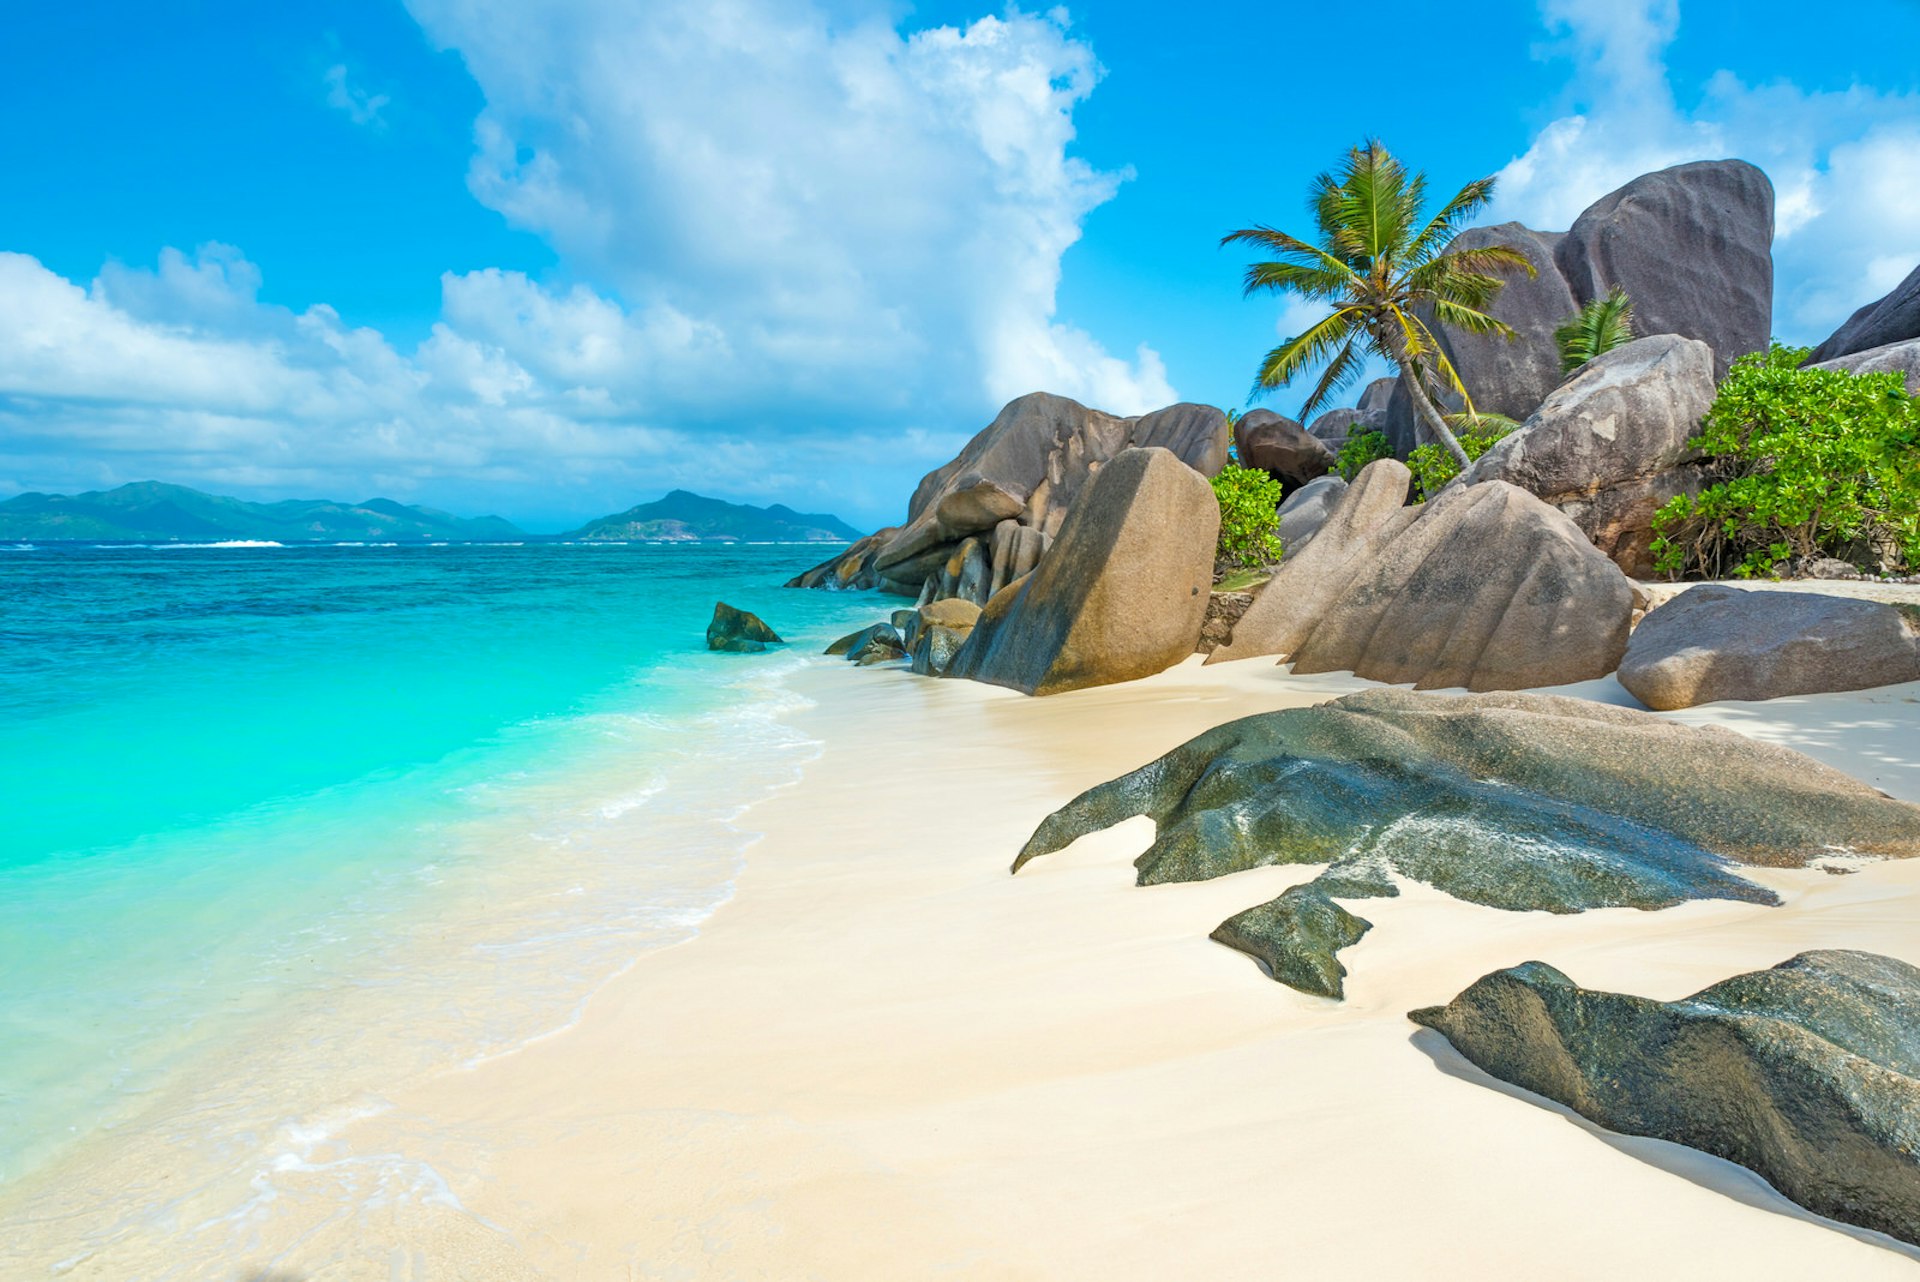 Granite rock formations on Anse Source d’Argent beach, the island of La Digue, Seychelles © Simon Dannhauer / Getty Images